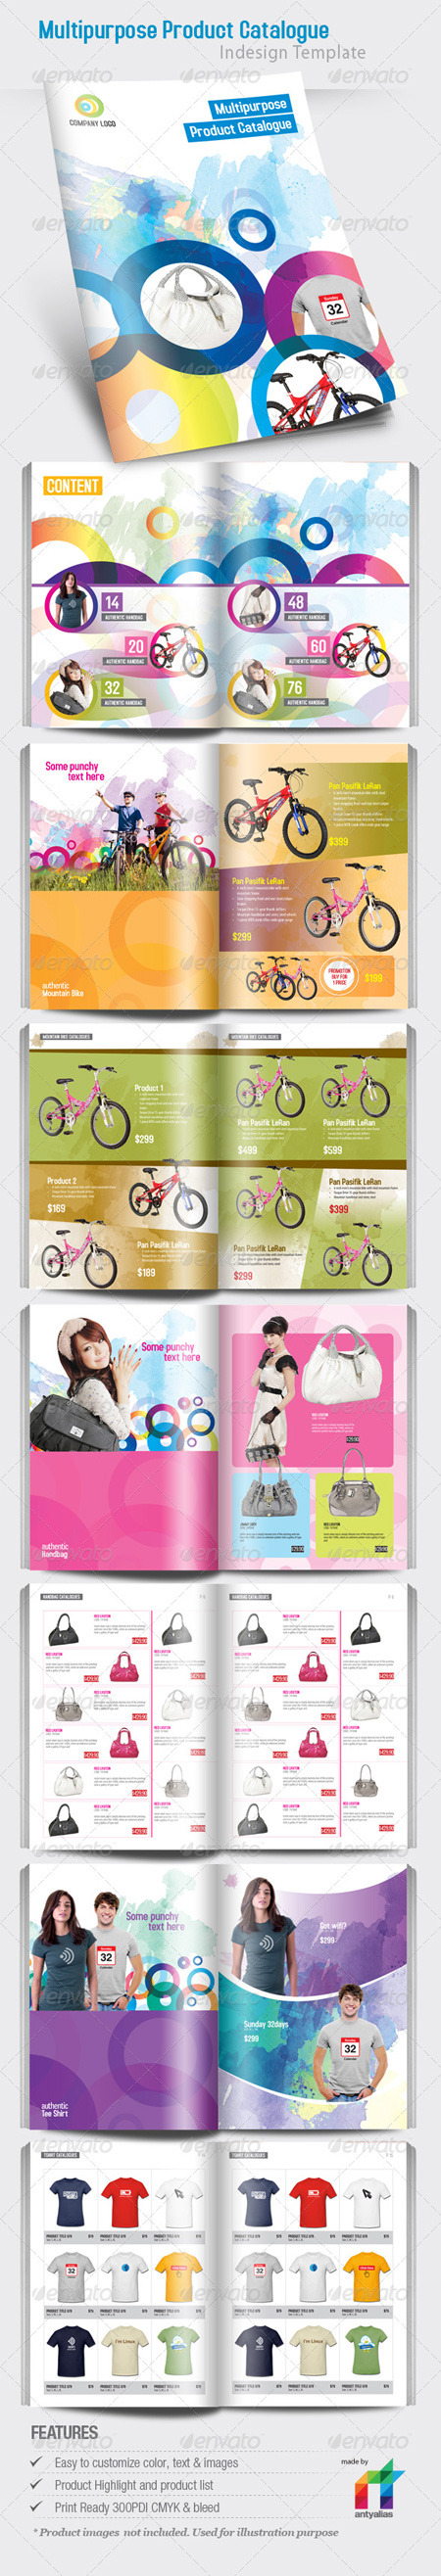 multipurpose-product-catalogue-indesign-template-160367-free-download